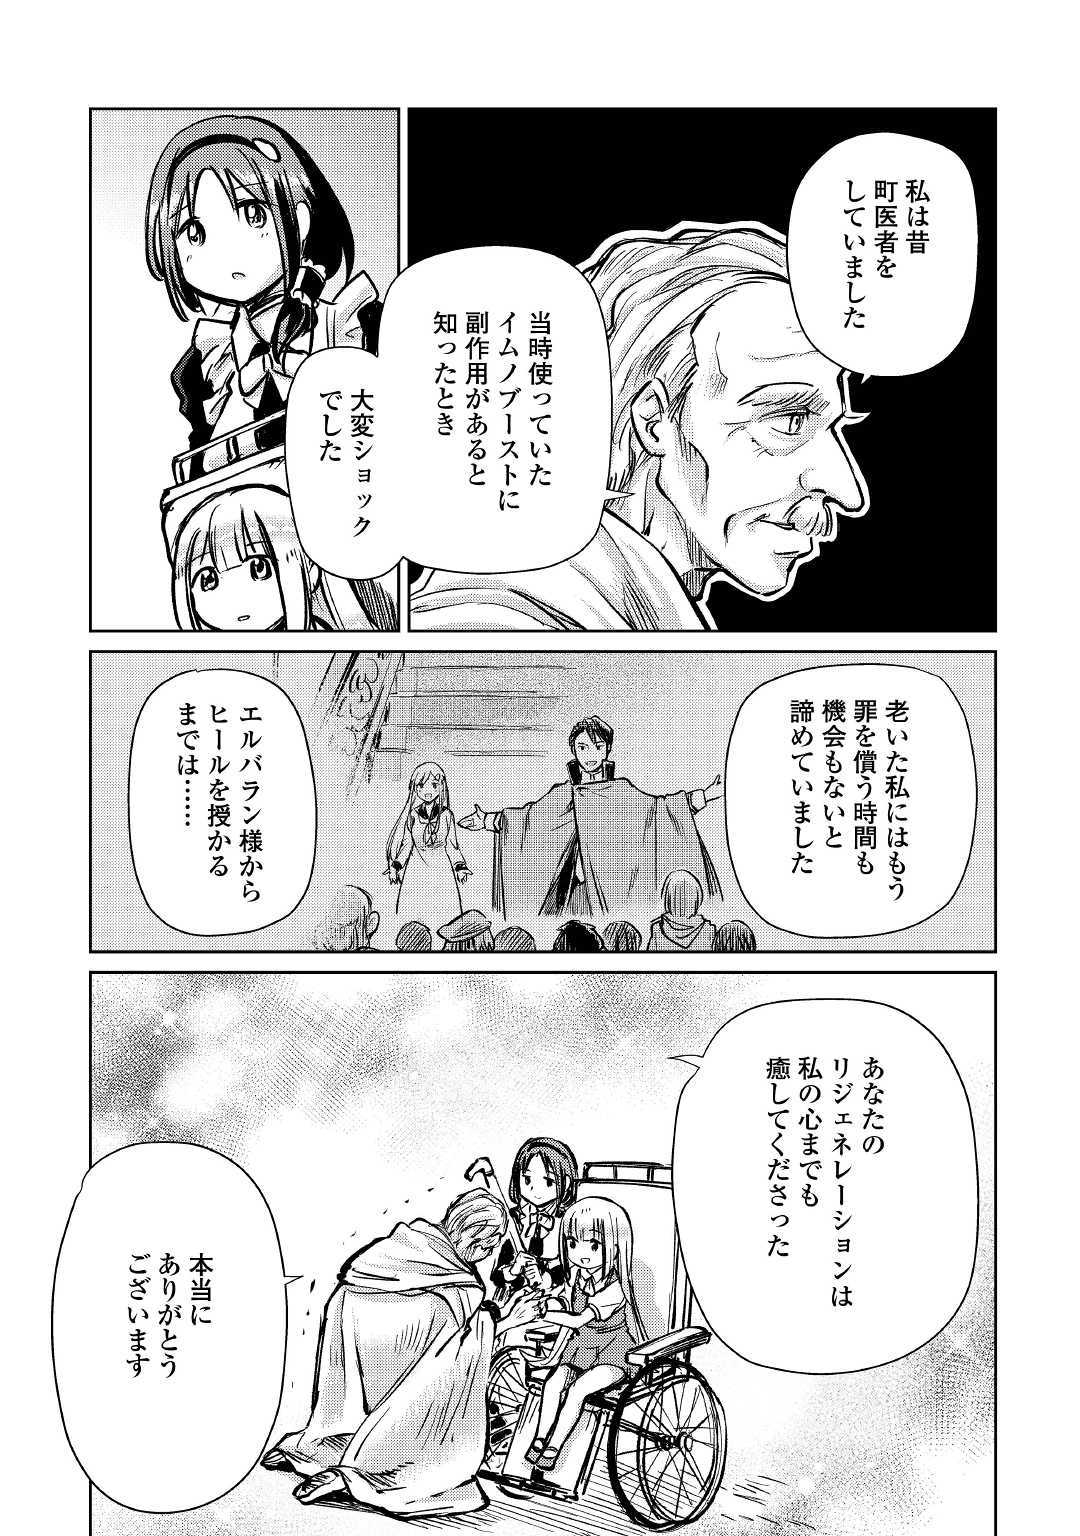 The Former Structural Researcher’s Story of Otherworldly Adventure 第11話 - Page 13